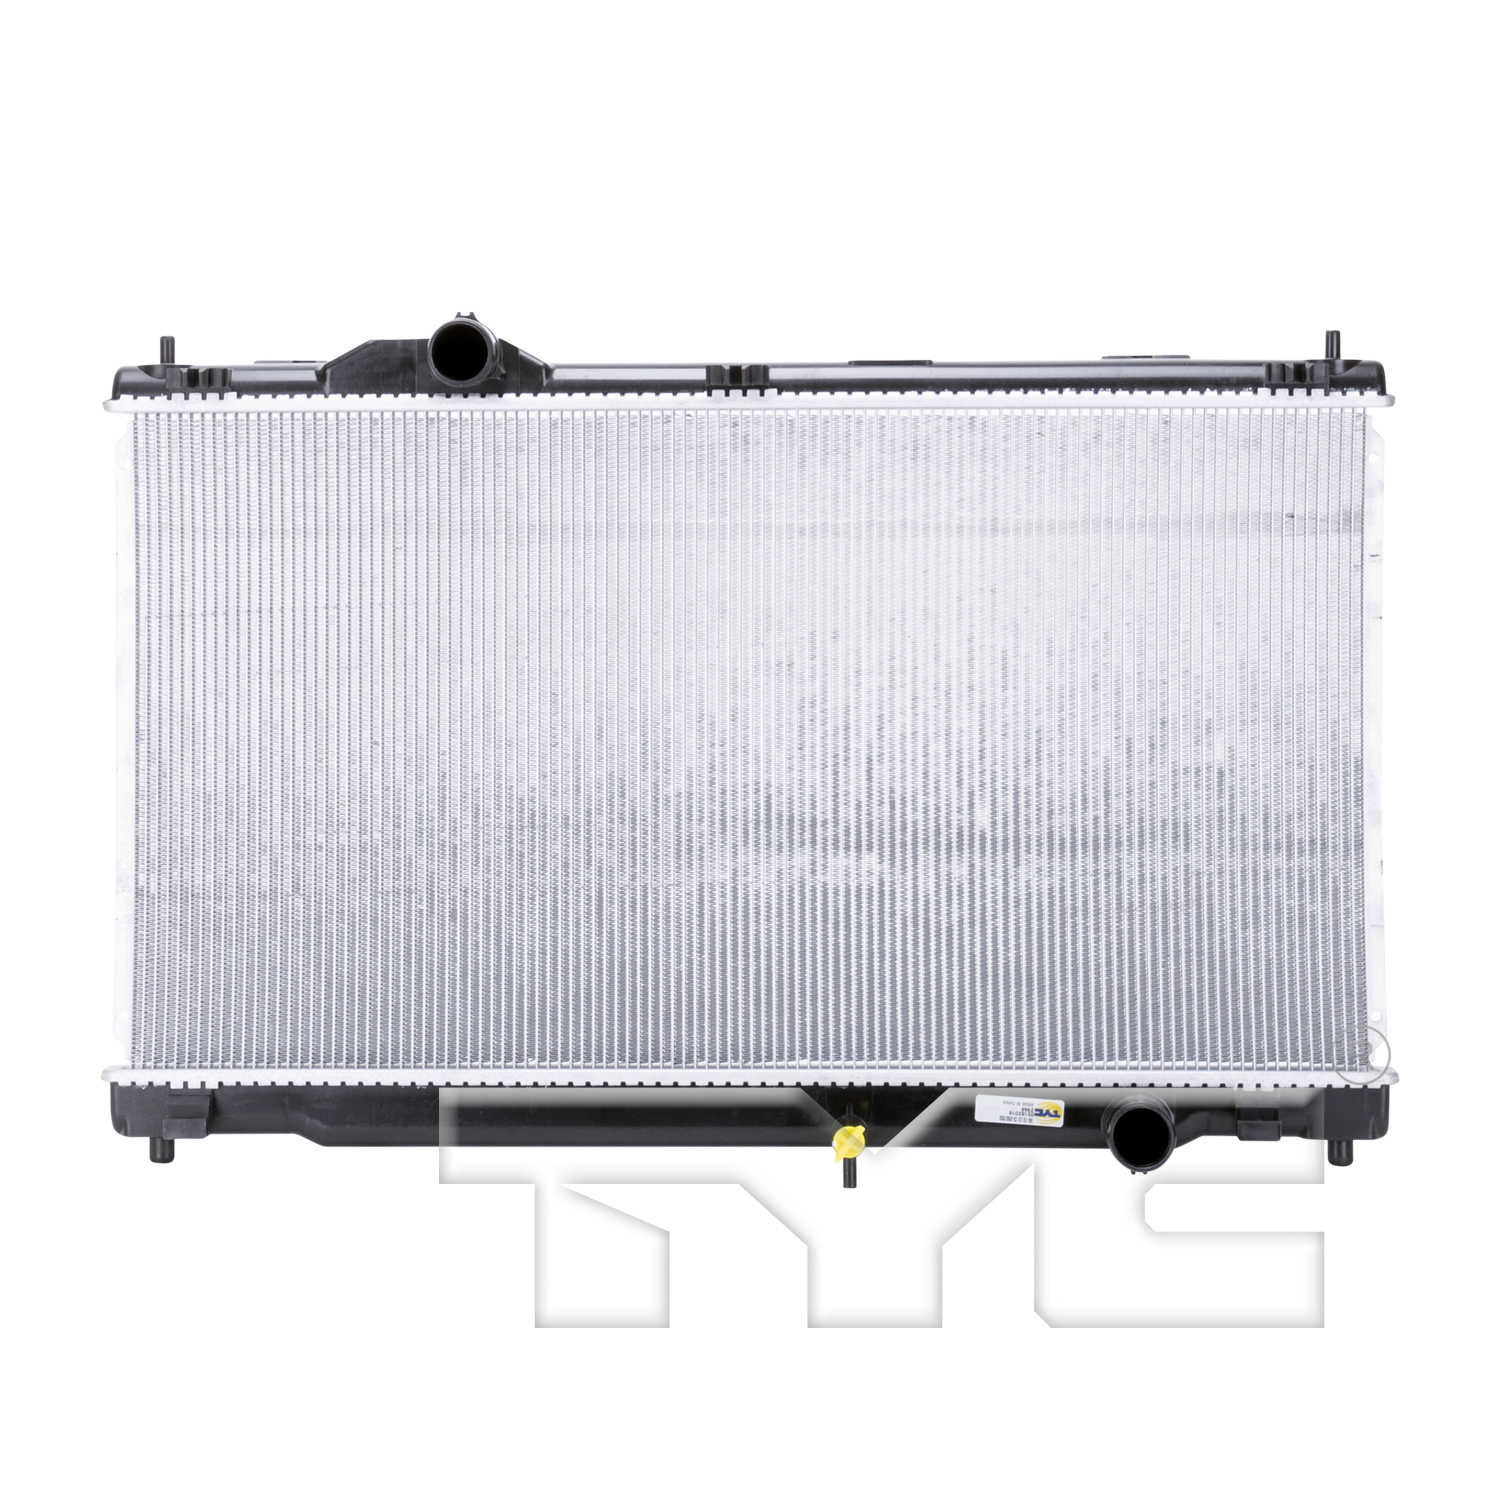 Aftermarket RADIATORS for LEXUS - IS250, IS250,06-13,Radiator assembly